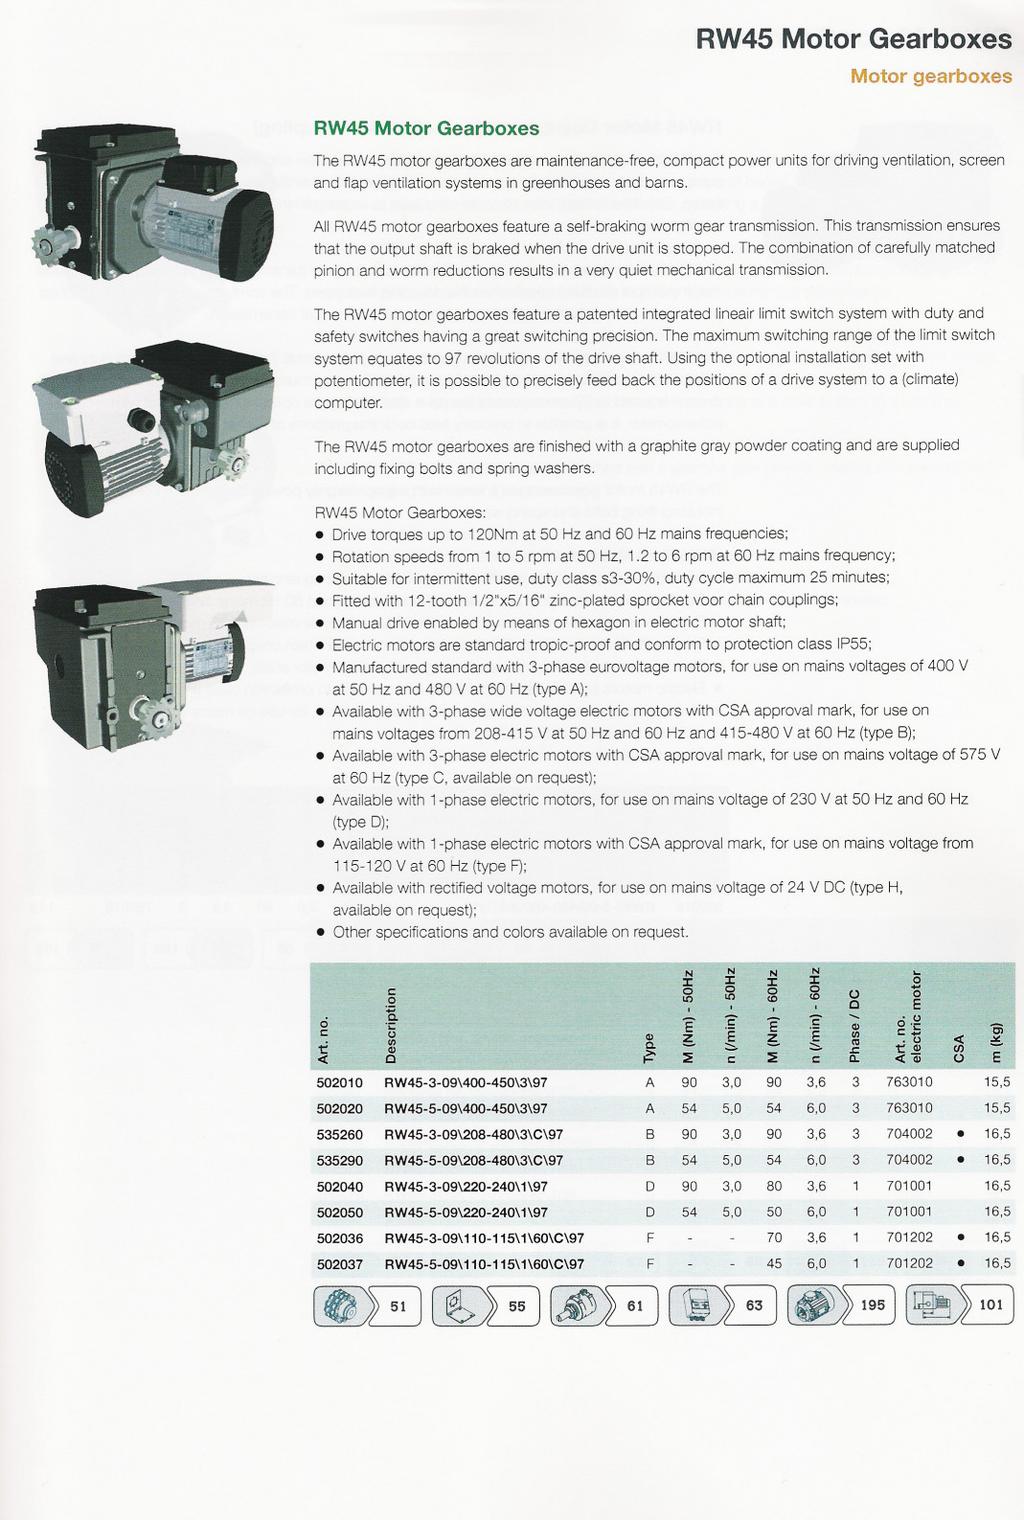 RW45 Motor Gearboxes Motor gearboxes RW45 Motor Gearboxes The RW45 motor gearboxes are maintenance-free, compact power units for driving ventilation, screen and flap ventilation systems in